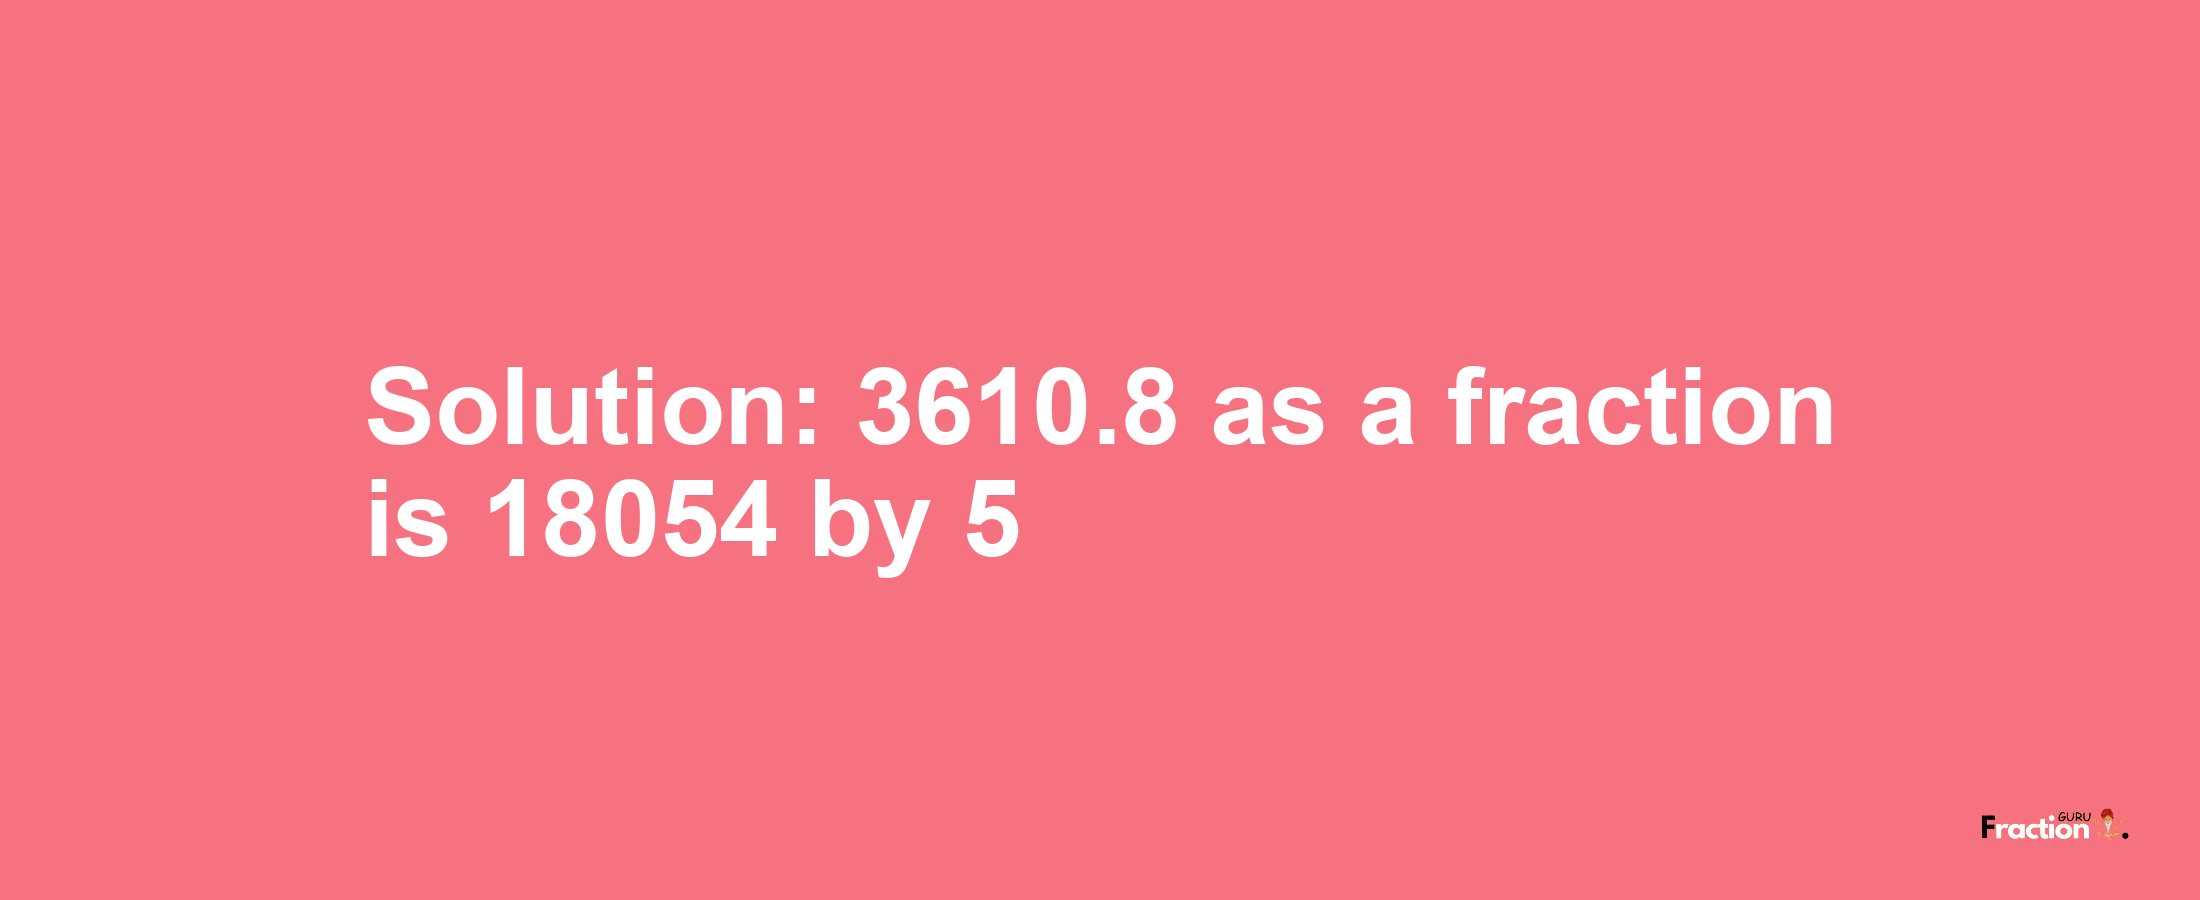 Solution:3610.8 as a fraction is 18054/5